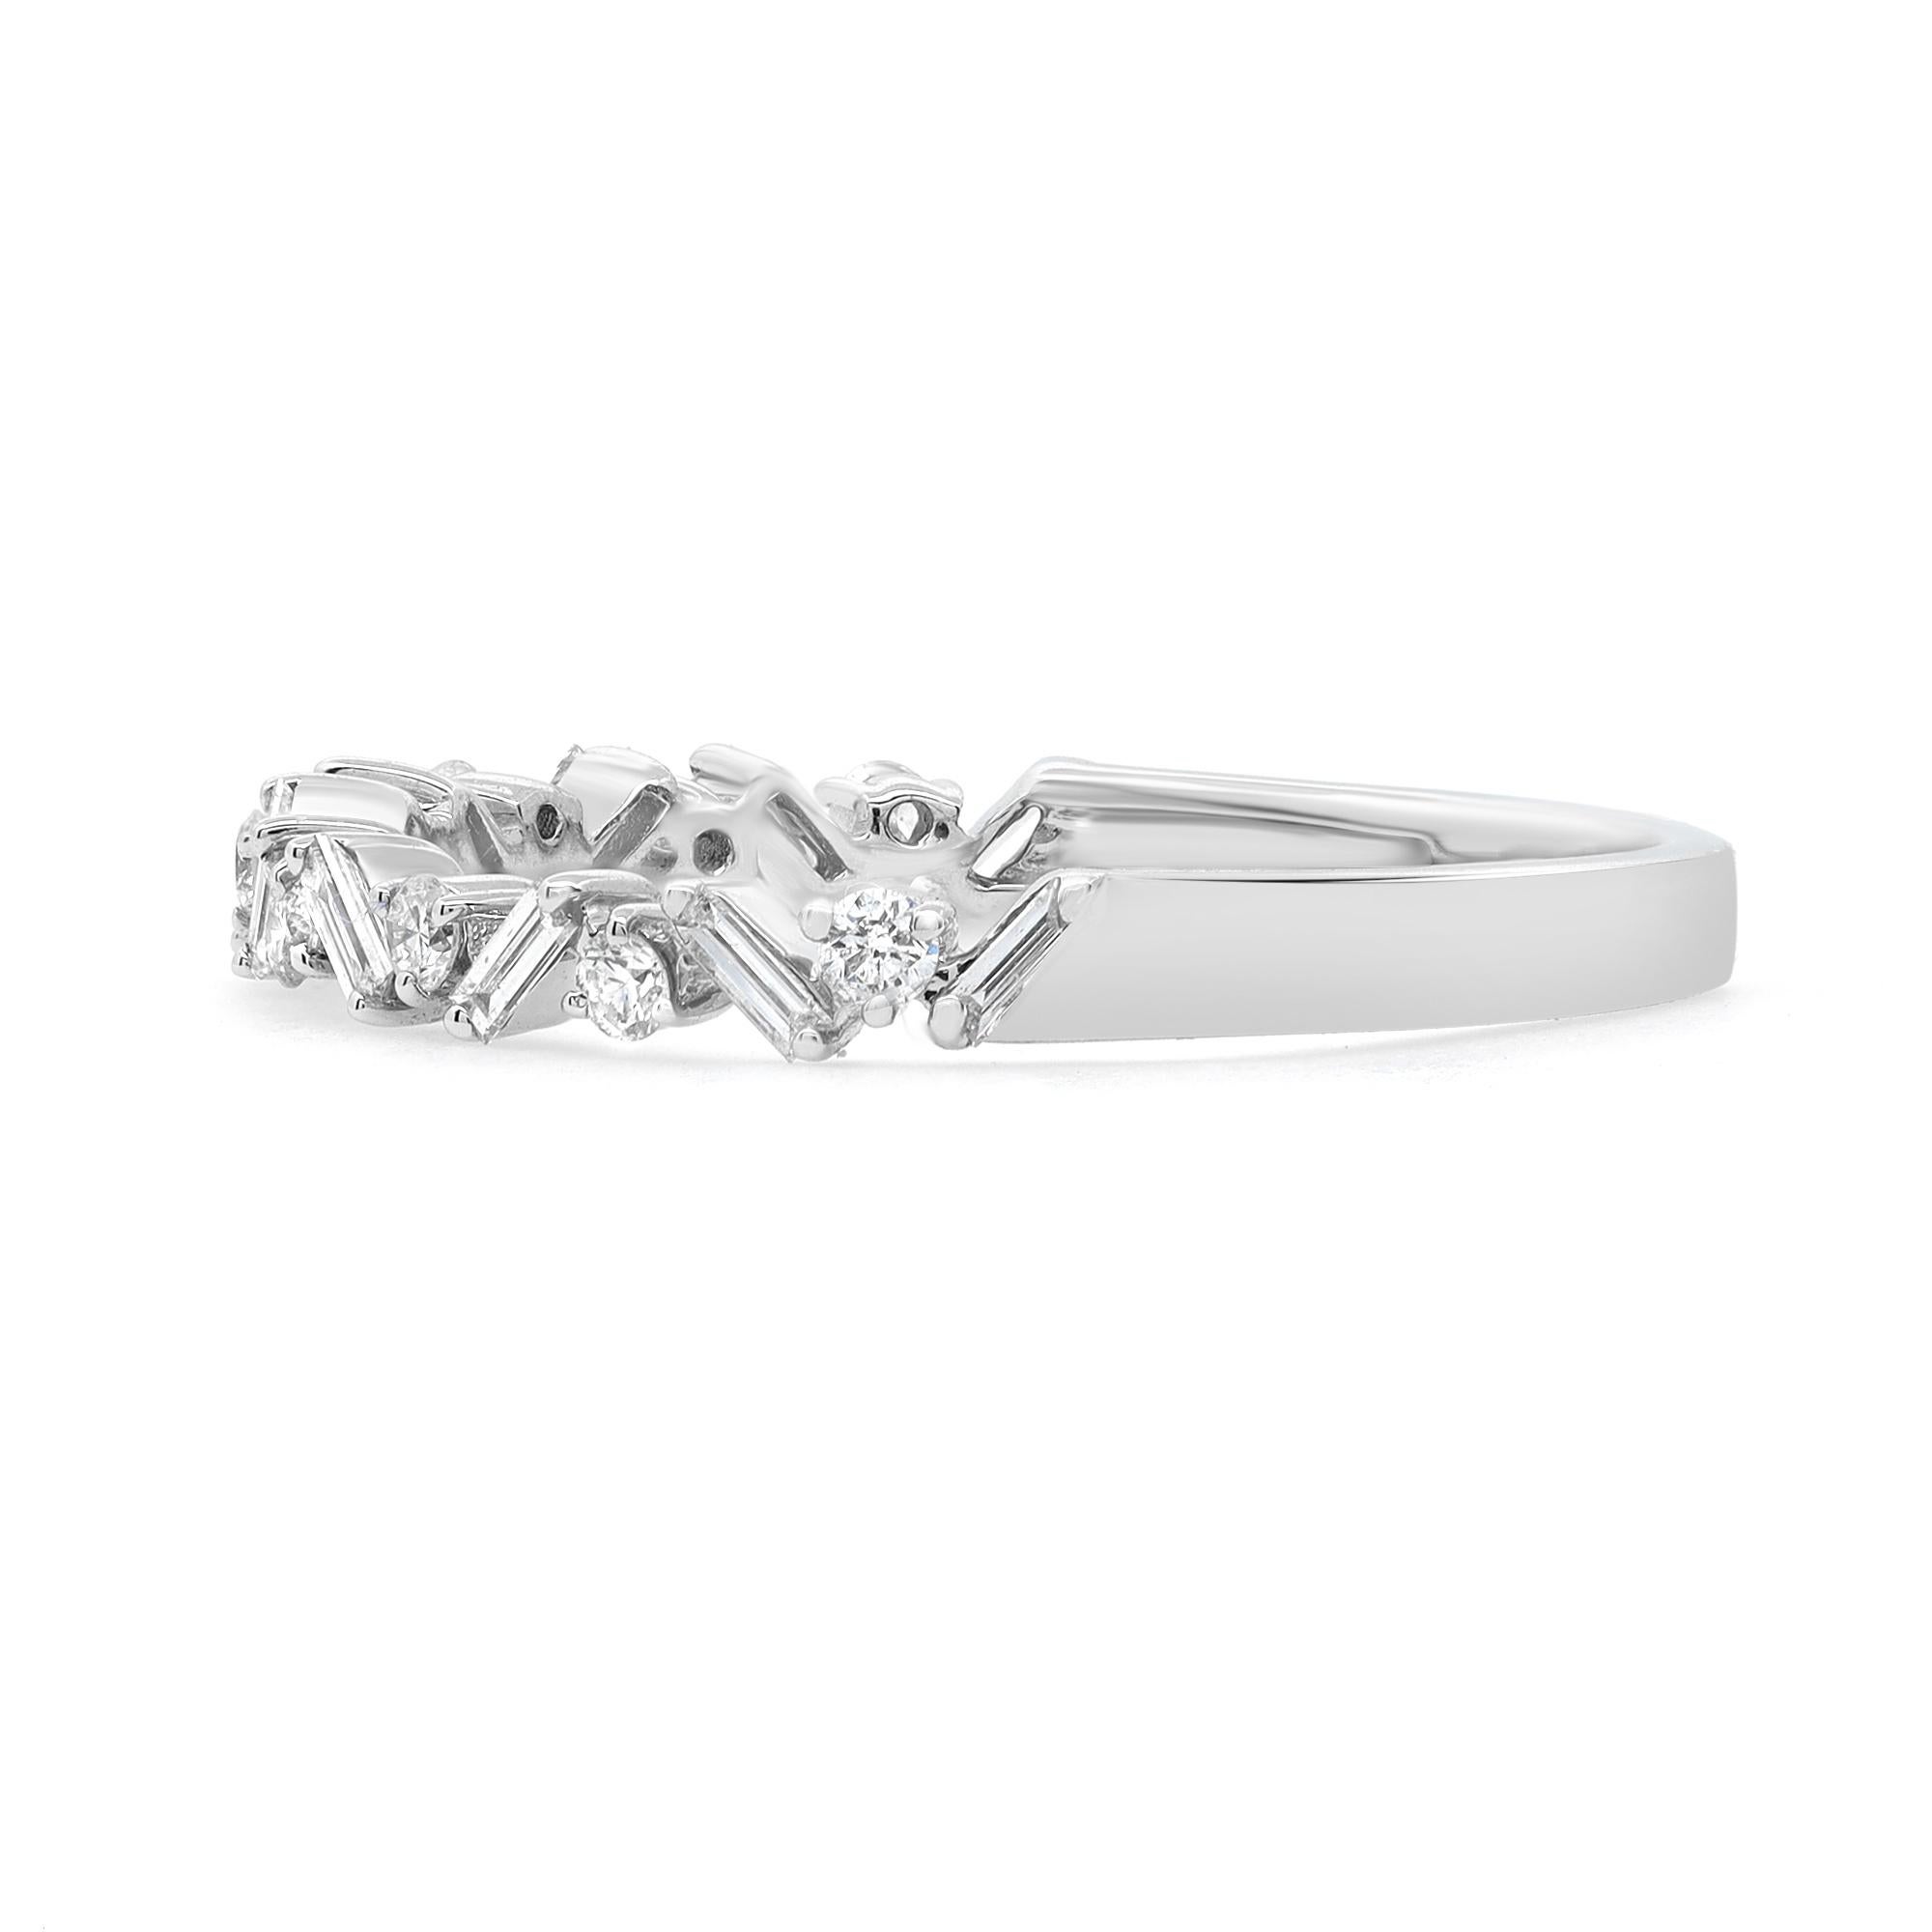 Simple and delicate diamond ring crafted in 18k white gold. This ring features prong set baguette cut diamonds set in a zig-zag pattern portraying a timeless, eye-catching style. It's stackable and easy to mix and match. Total diamond weight: